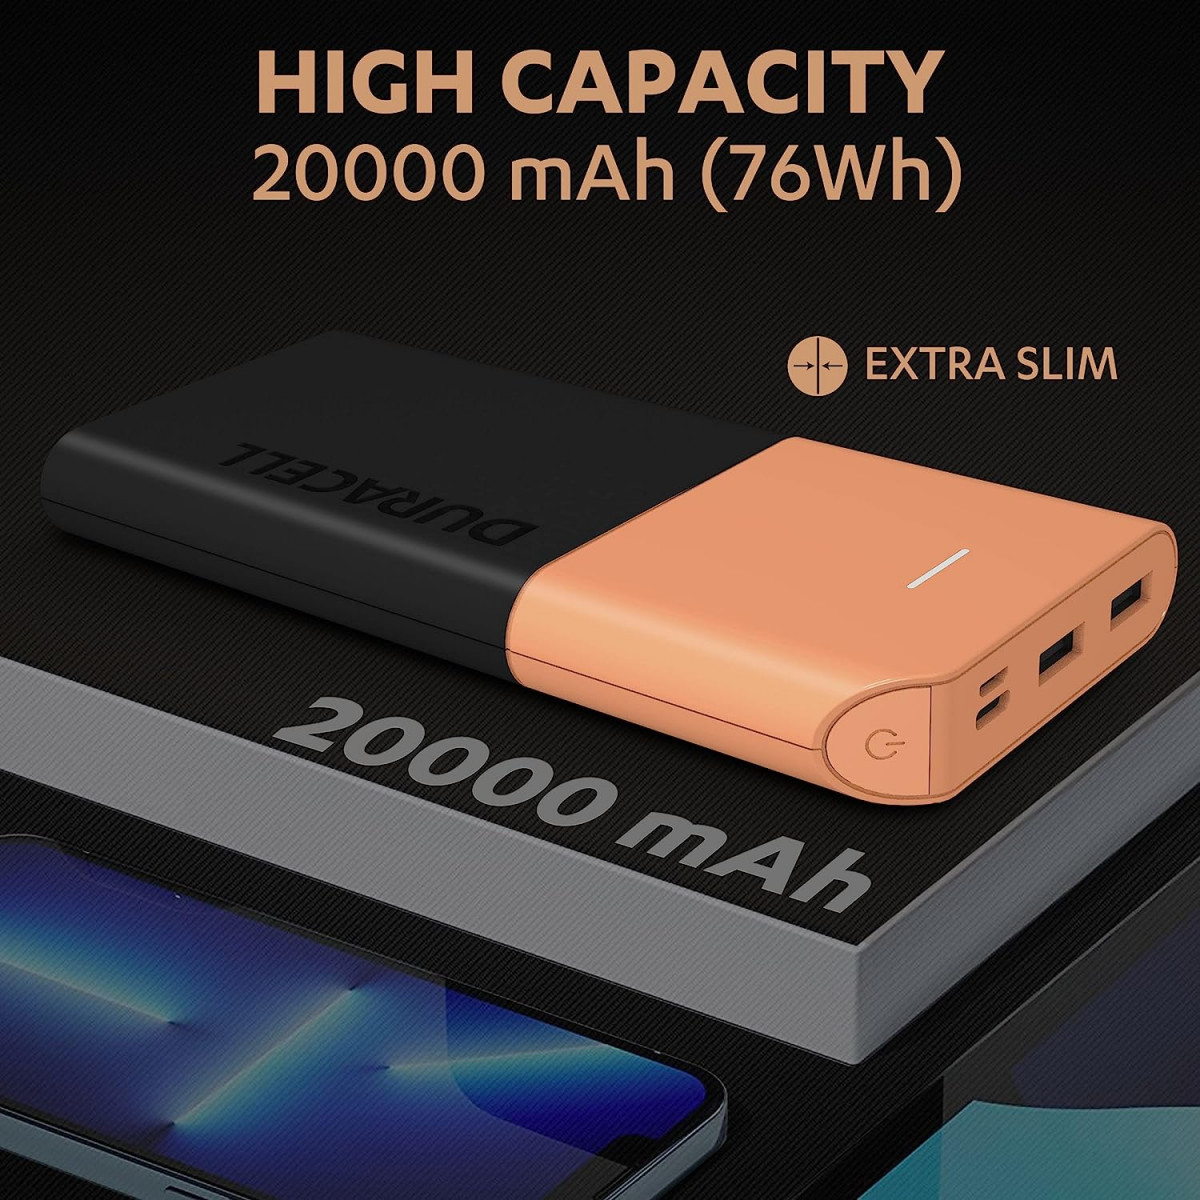 Duracell 20000 MAH Slimmest Power Bank with 1 Type C PD and 2 USB A Port 225W Fast Charging Portable Charger to Charges 3 Devices